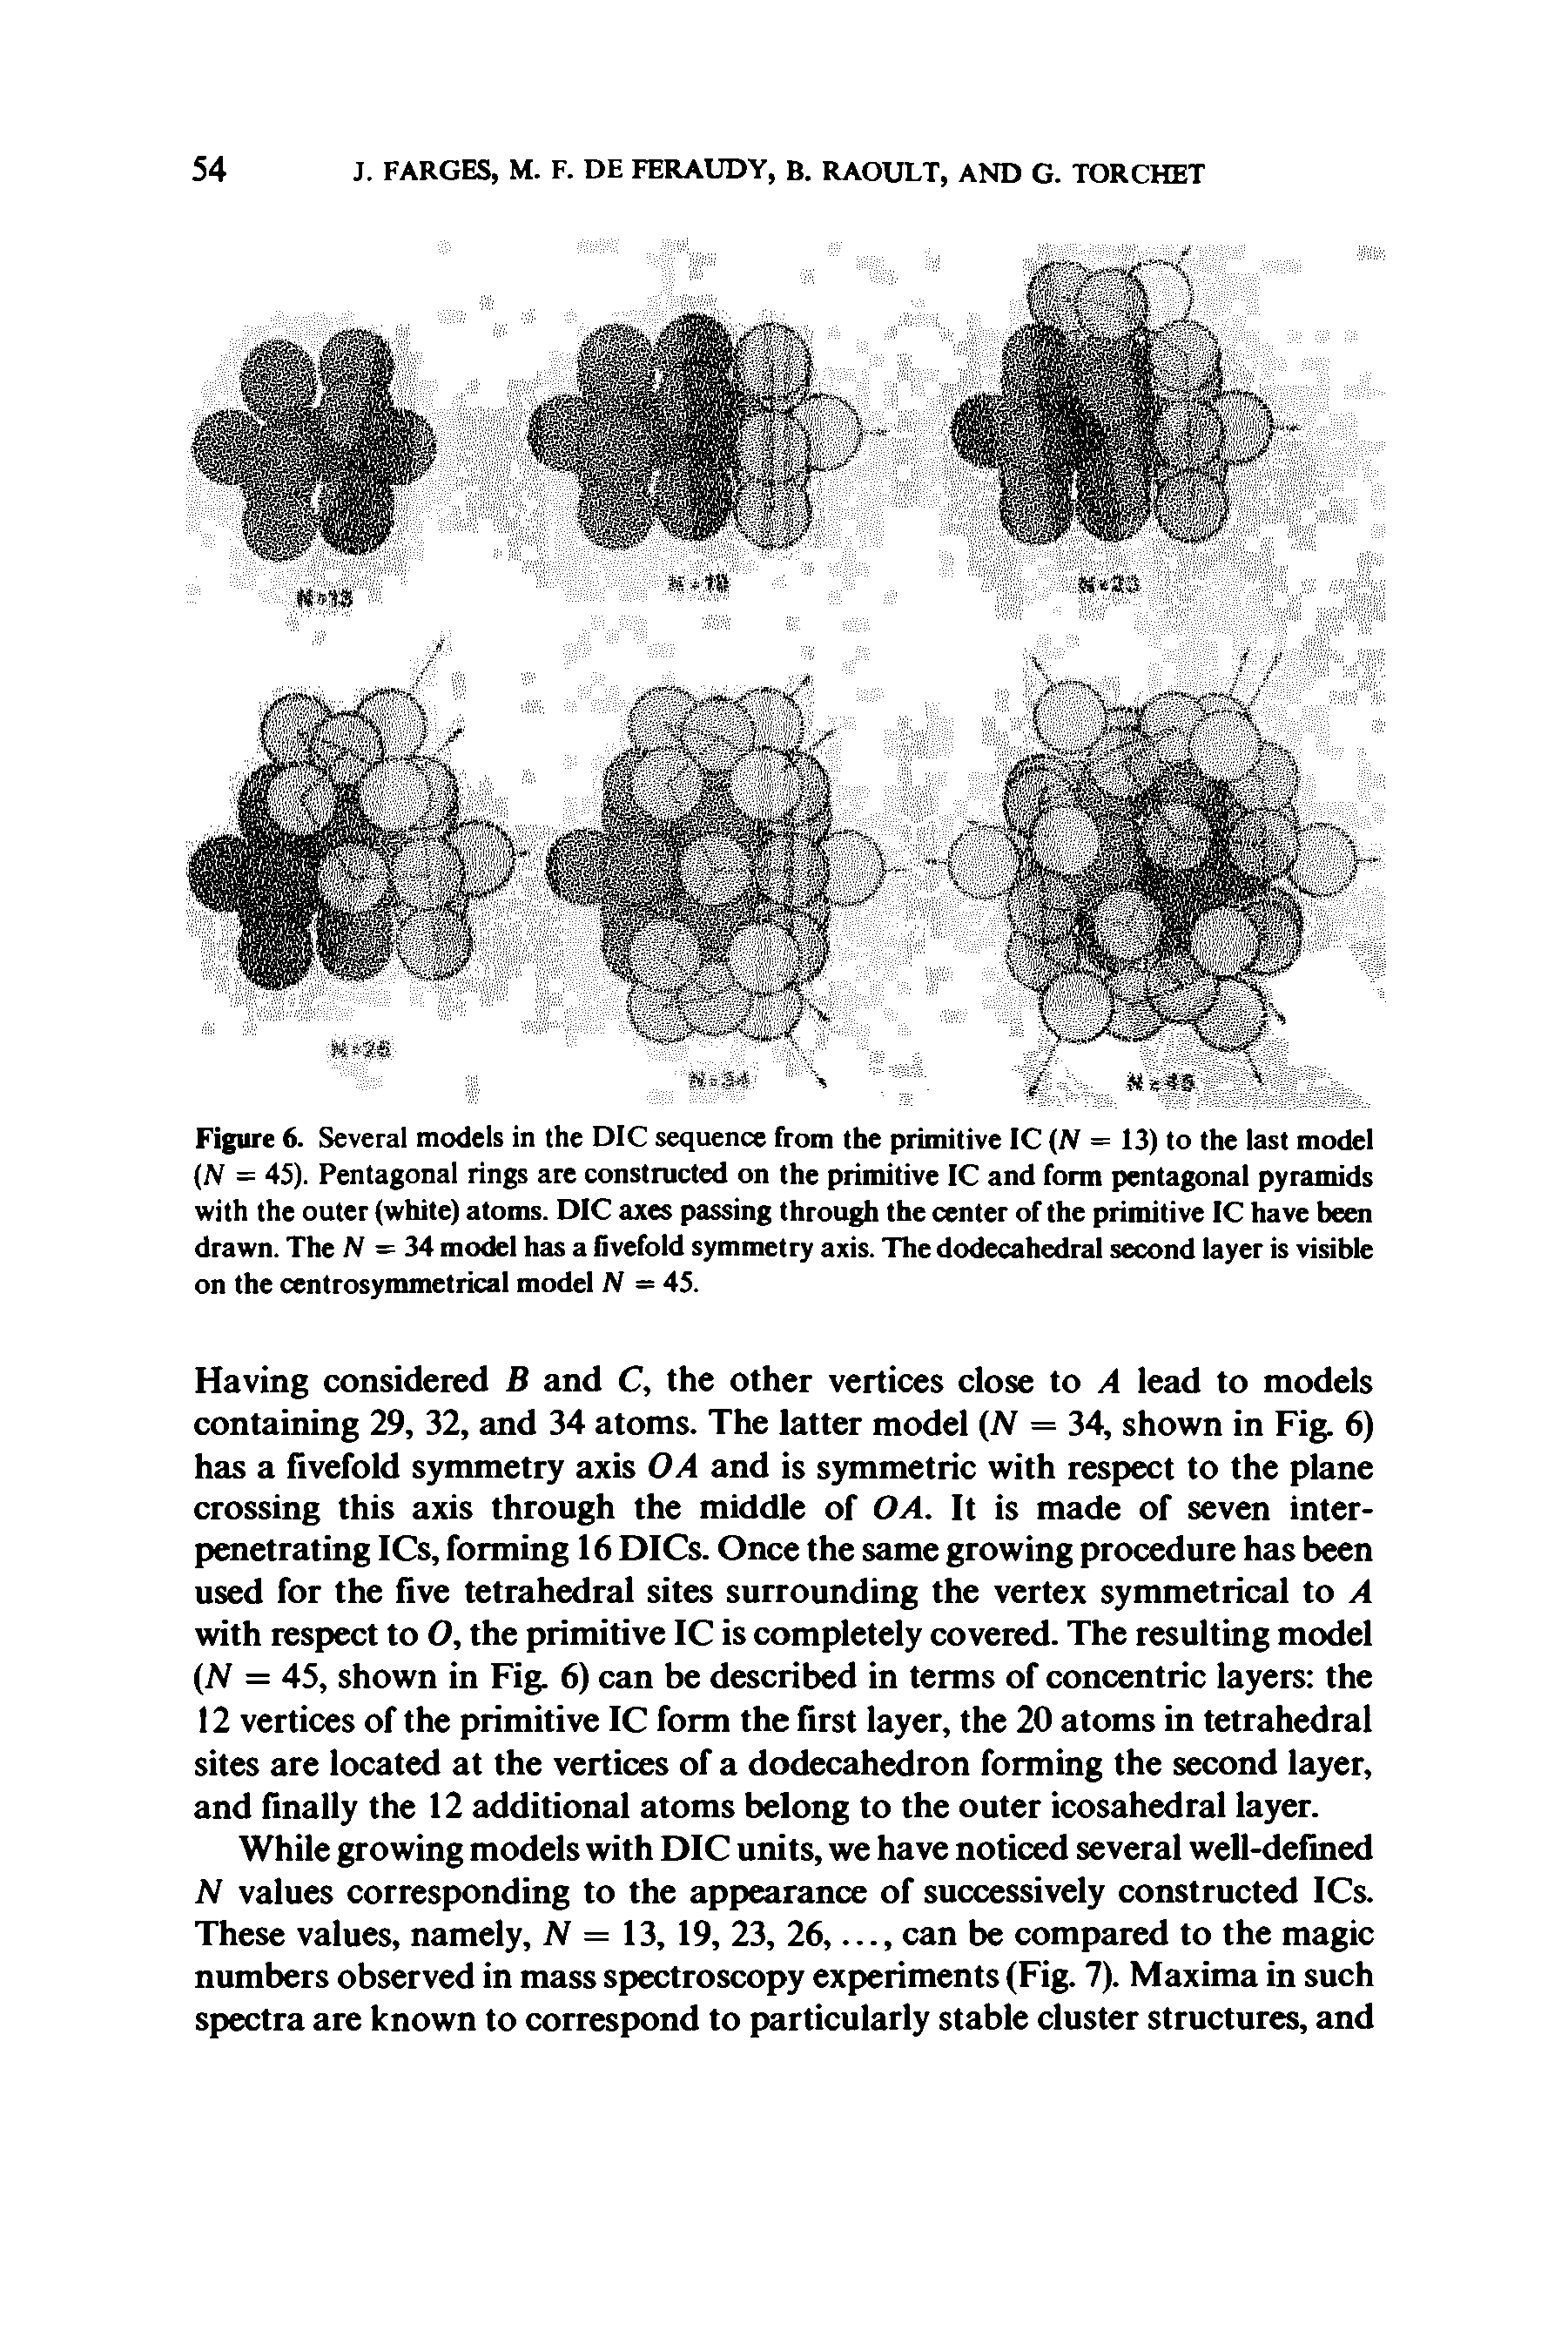 Figure 6. Several models in the DIC sequence from the primitive IC N = 13) to the last model N = 45). Pentagonal rings are constructed on the primitive IC and form pentagonal pyramids with the outer (white) atoms. DIC axes passing through the center of the primitive IC have been drawn. The N = 34 model has a fivefold symmetry axis. The dodecahedral second layer is visible on the centrosymmetrical model N - 45.